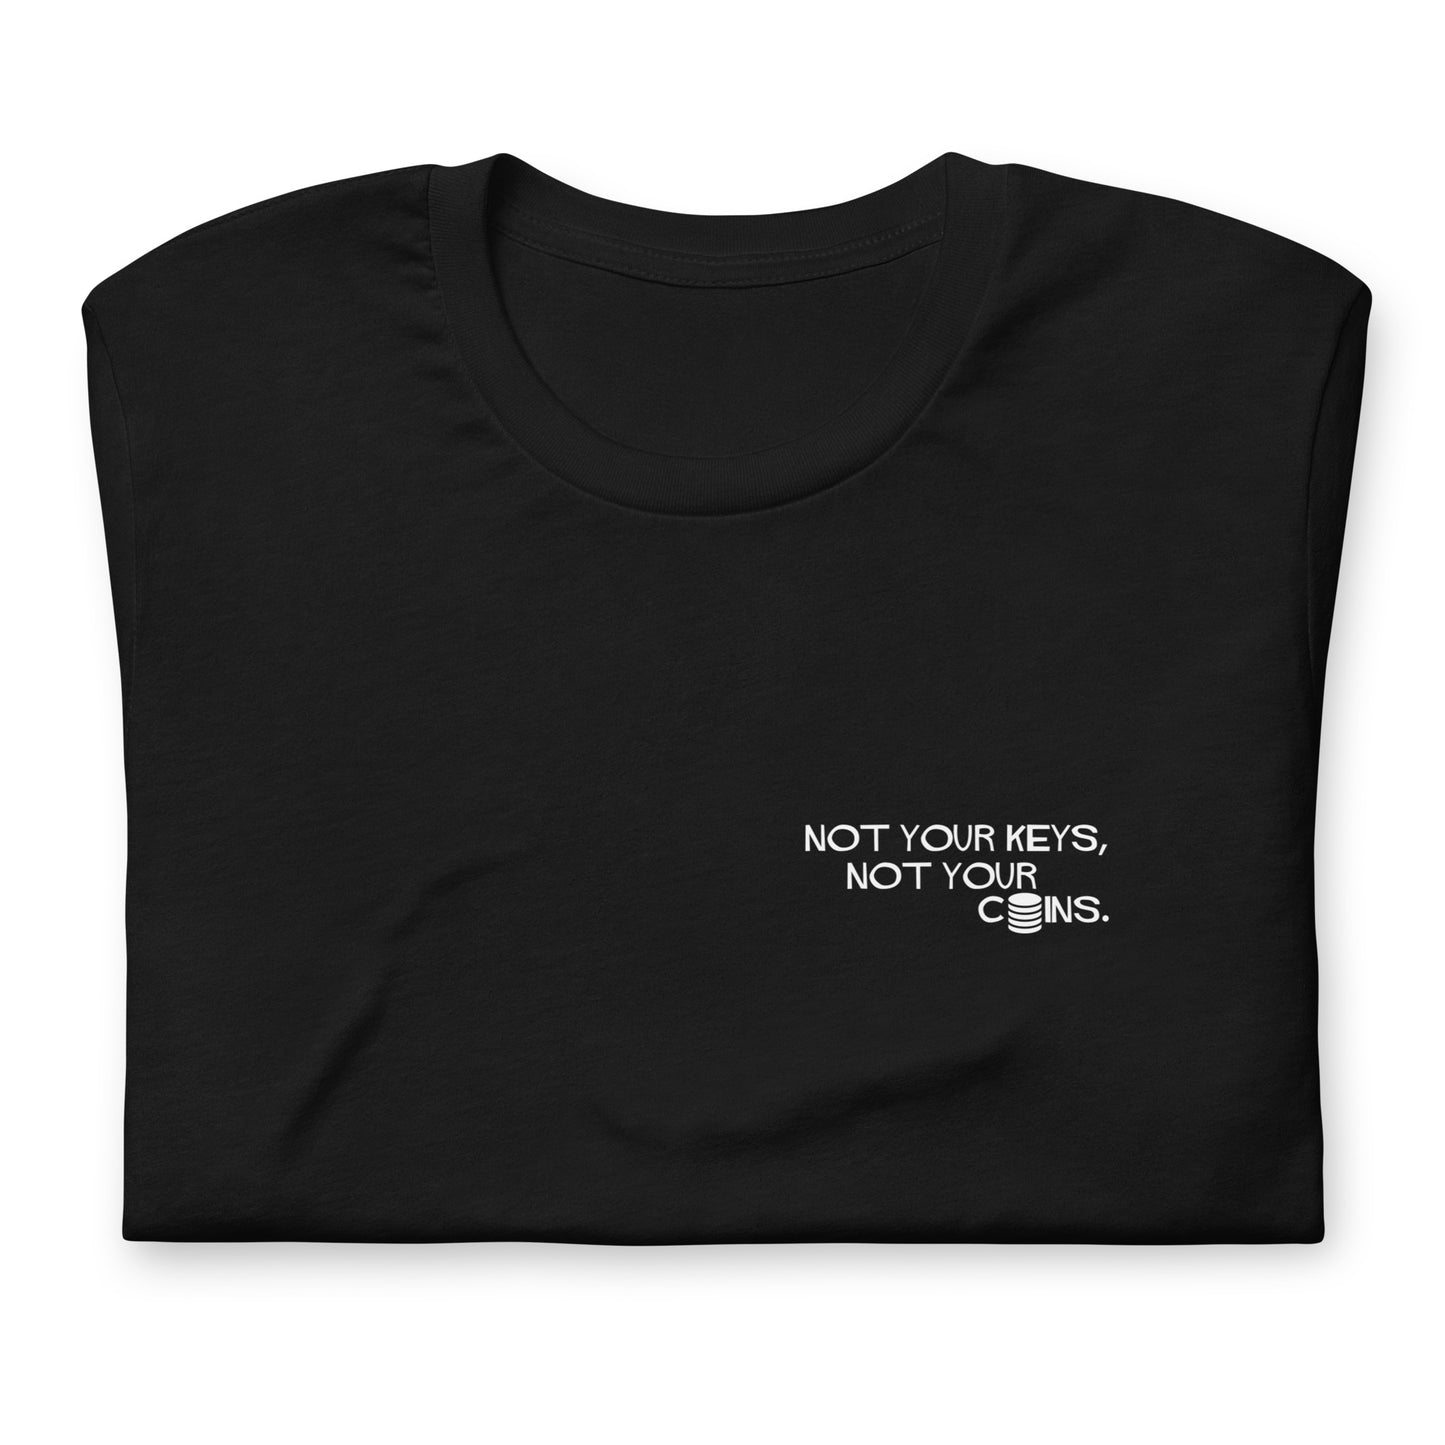 Not Your Keys, Not Your Coins Black Tee